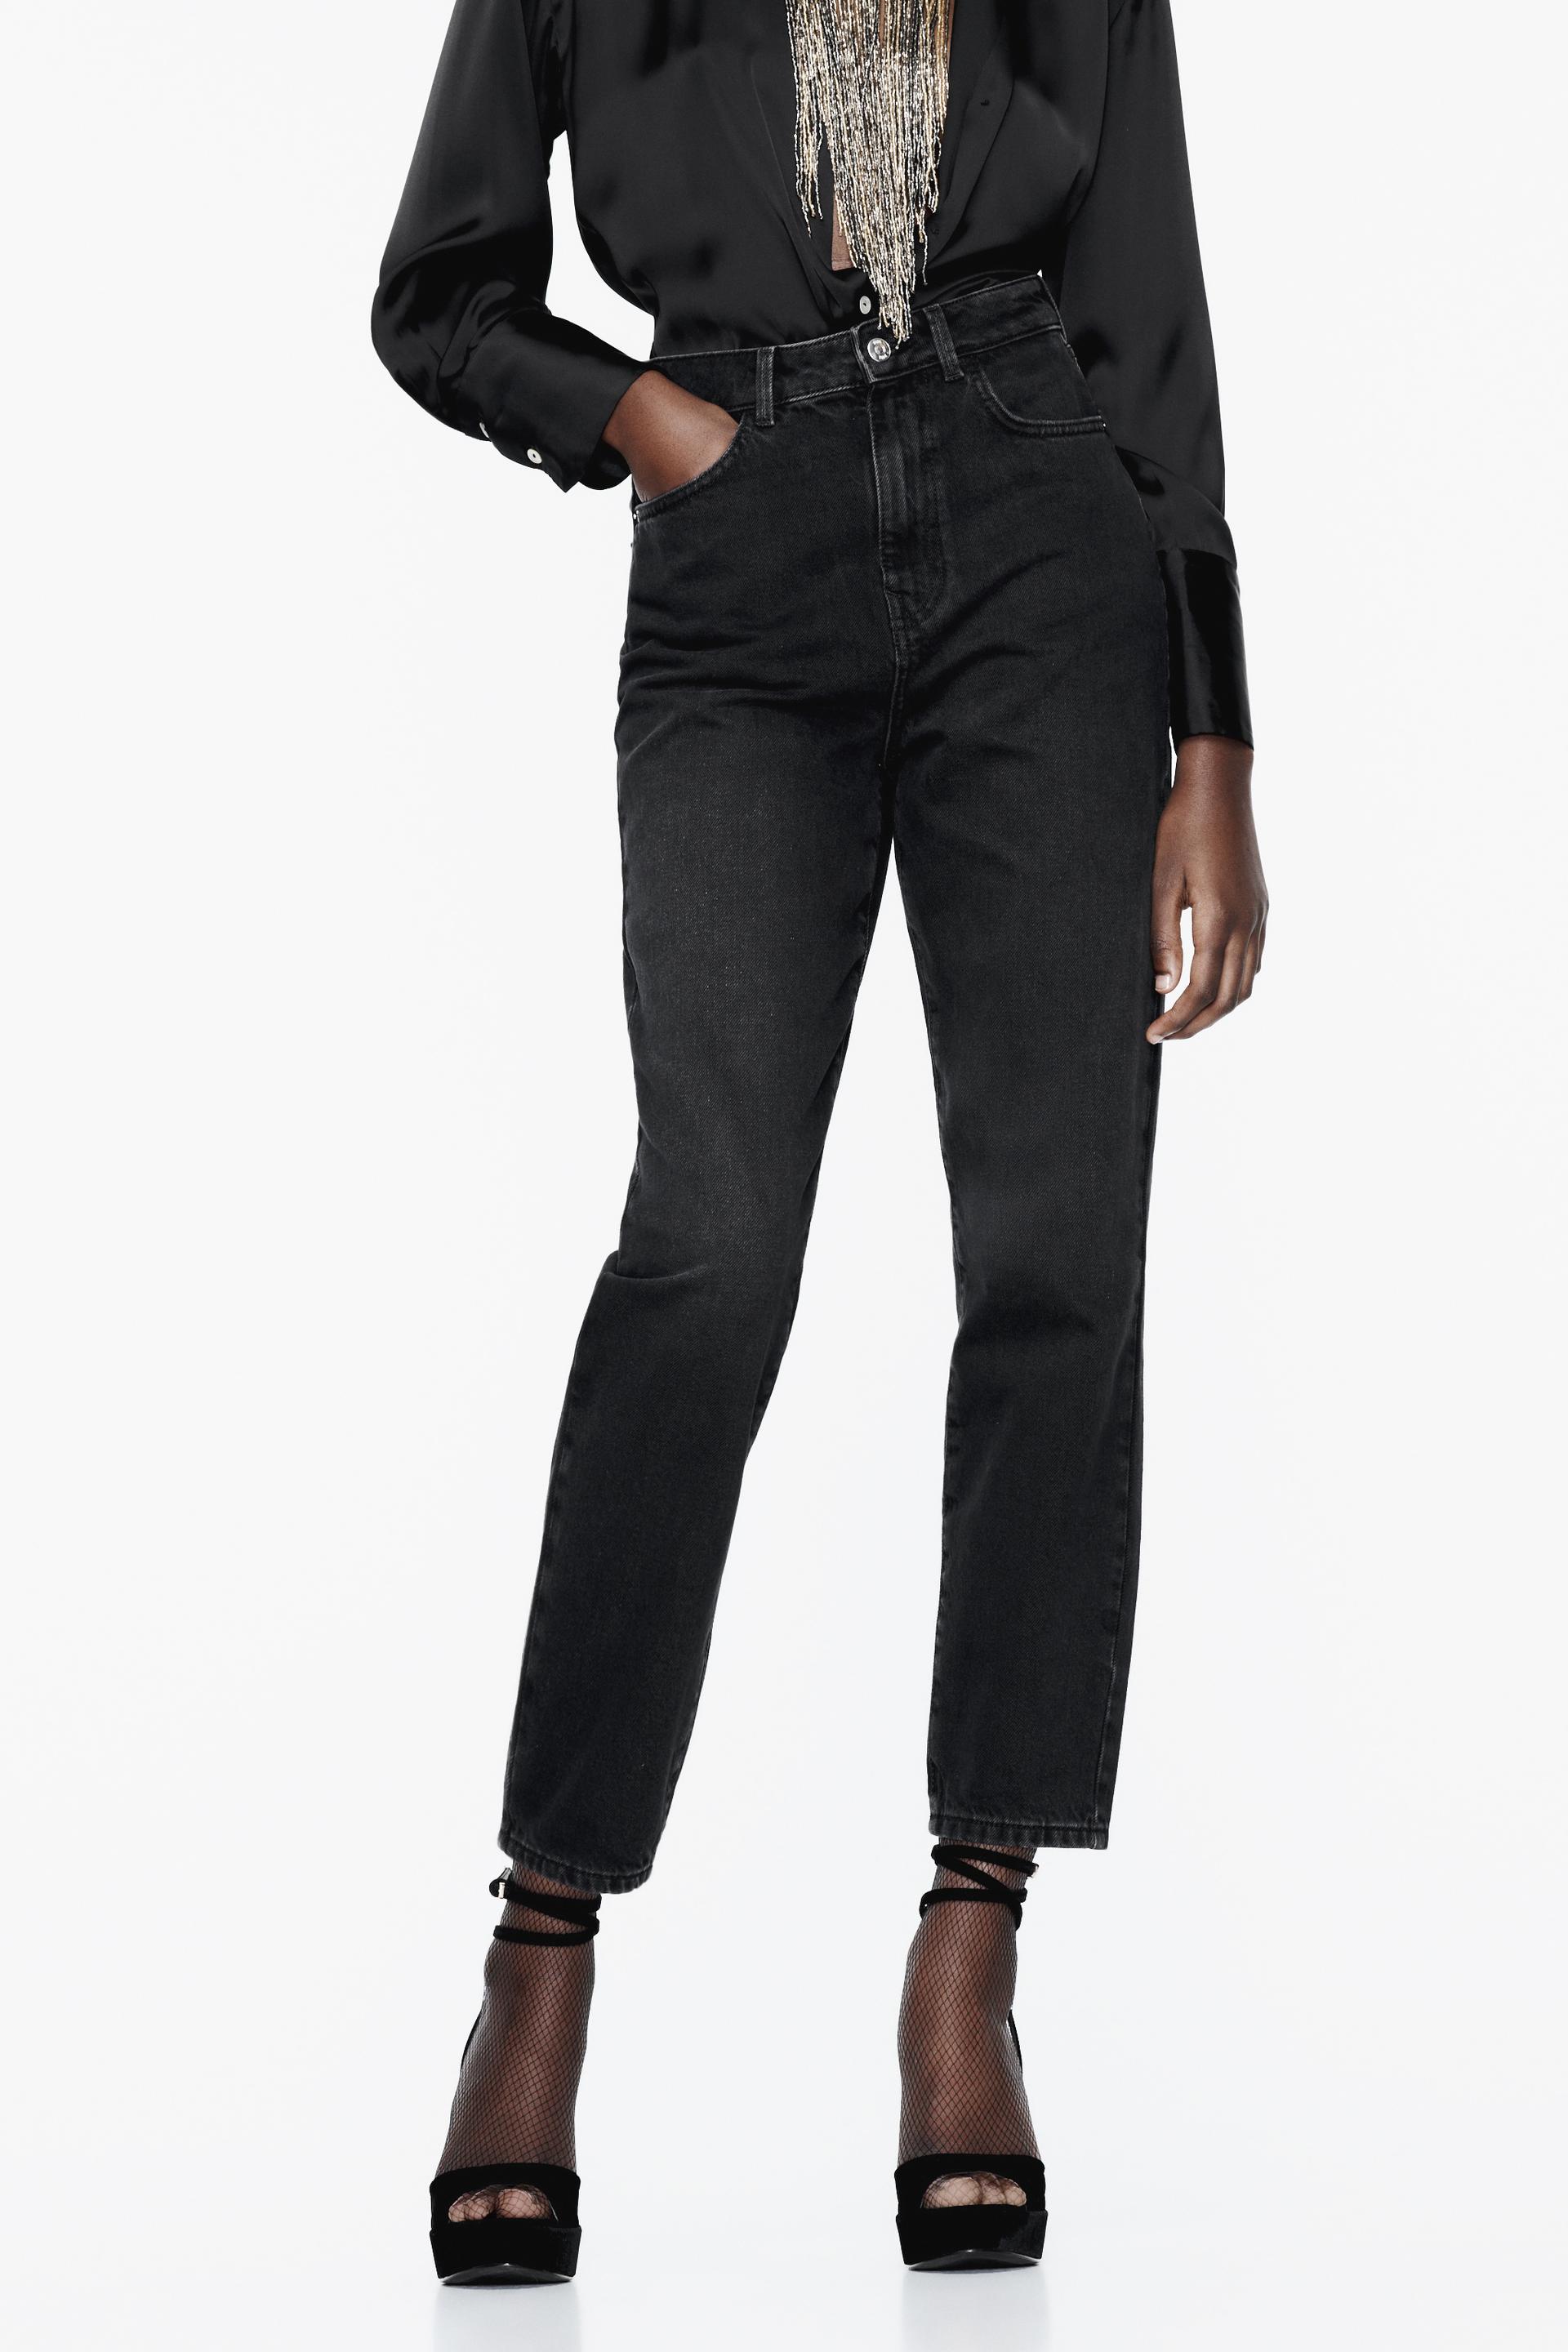 ZW NAVY STRAIGHT-LEG HIGH-WAIST FAUX LEATHER TROUSERS - Black